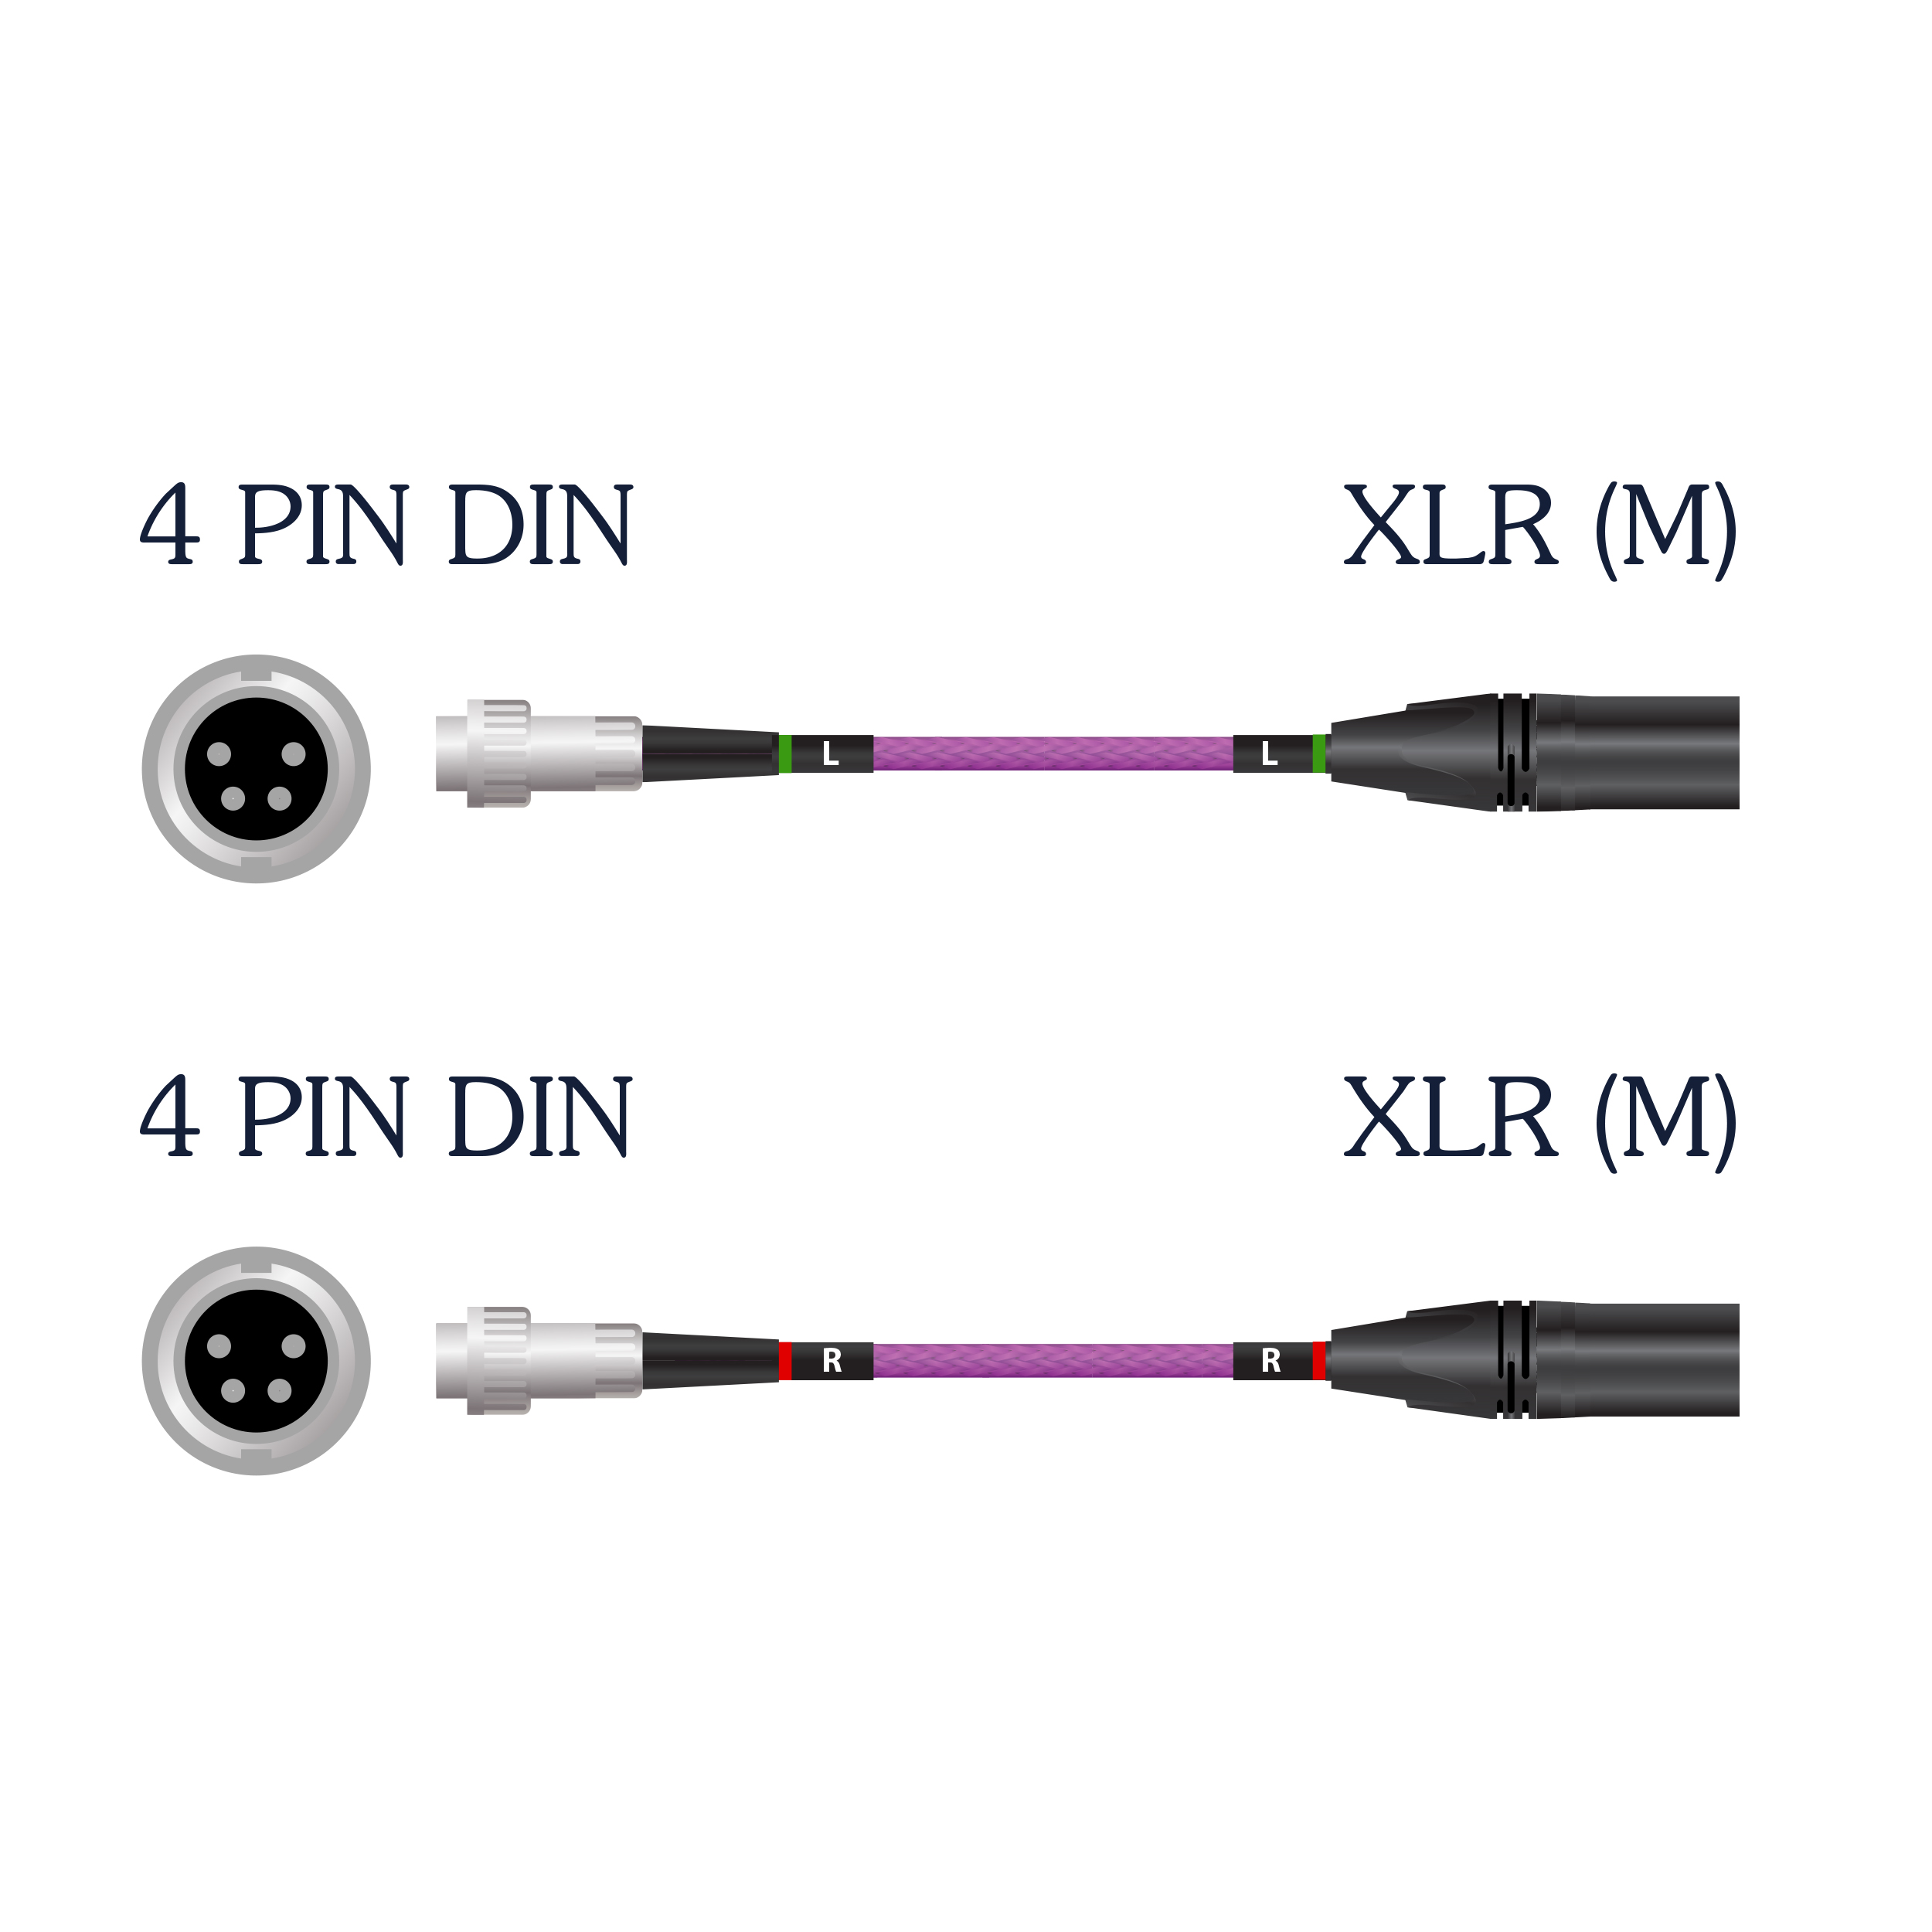 <p align="center">Frey 2 Specialty 4 Pin DIN To XLR (M) Cable Set</p>